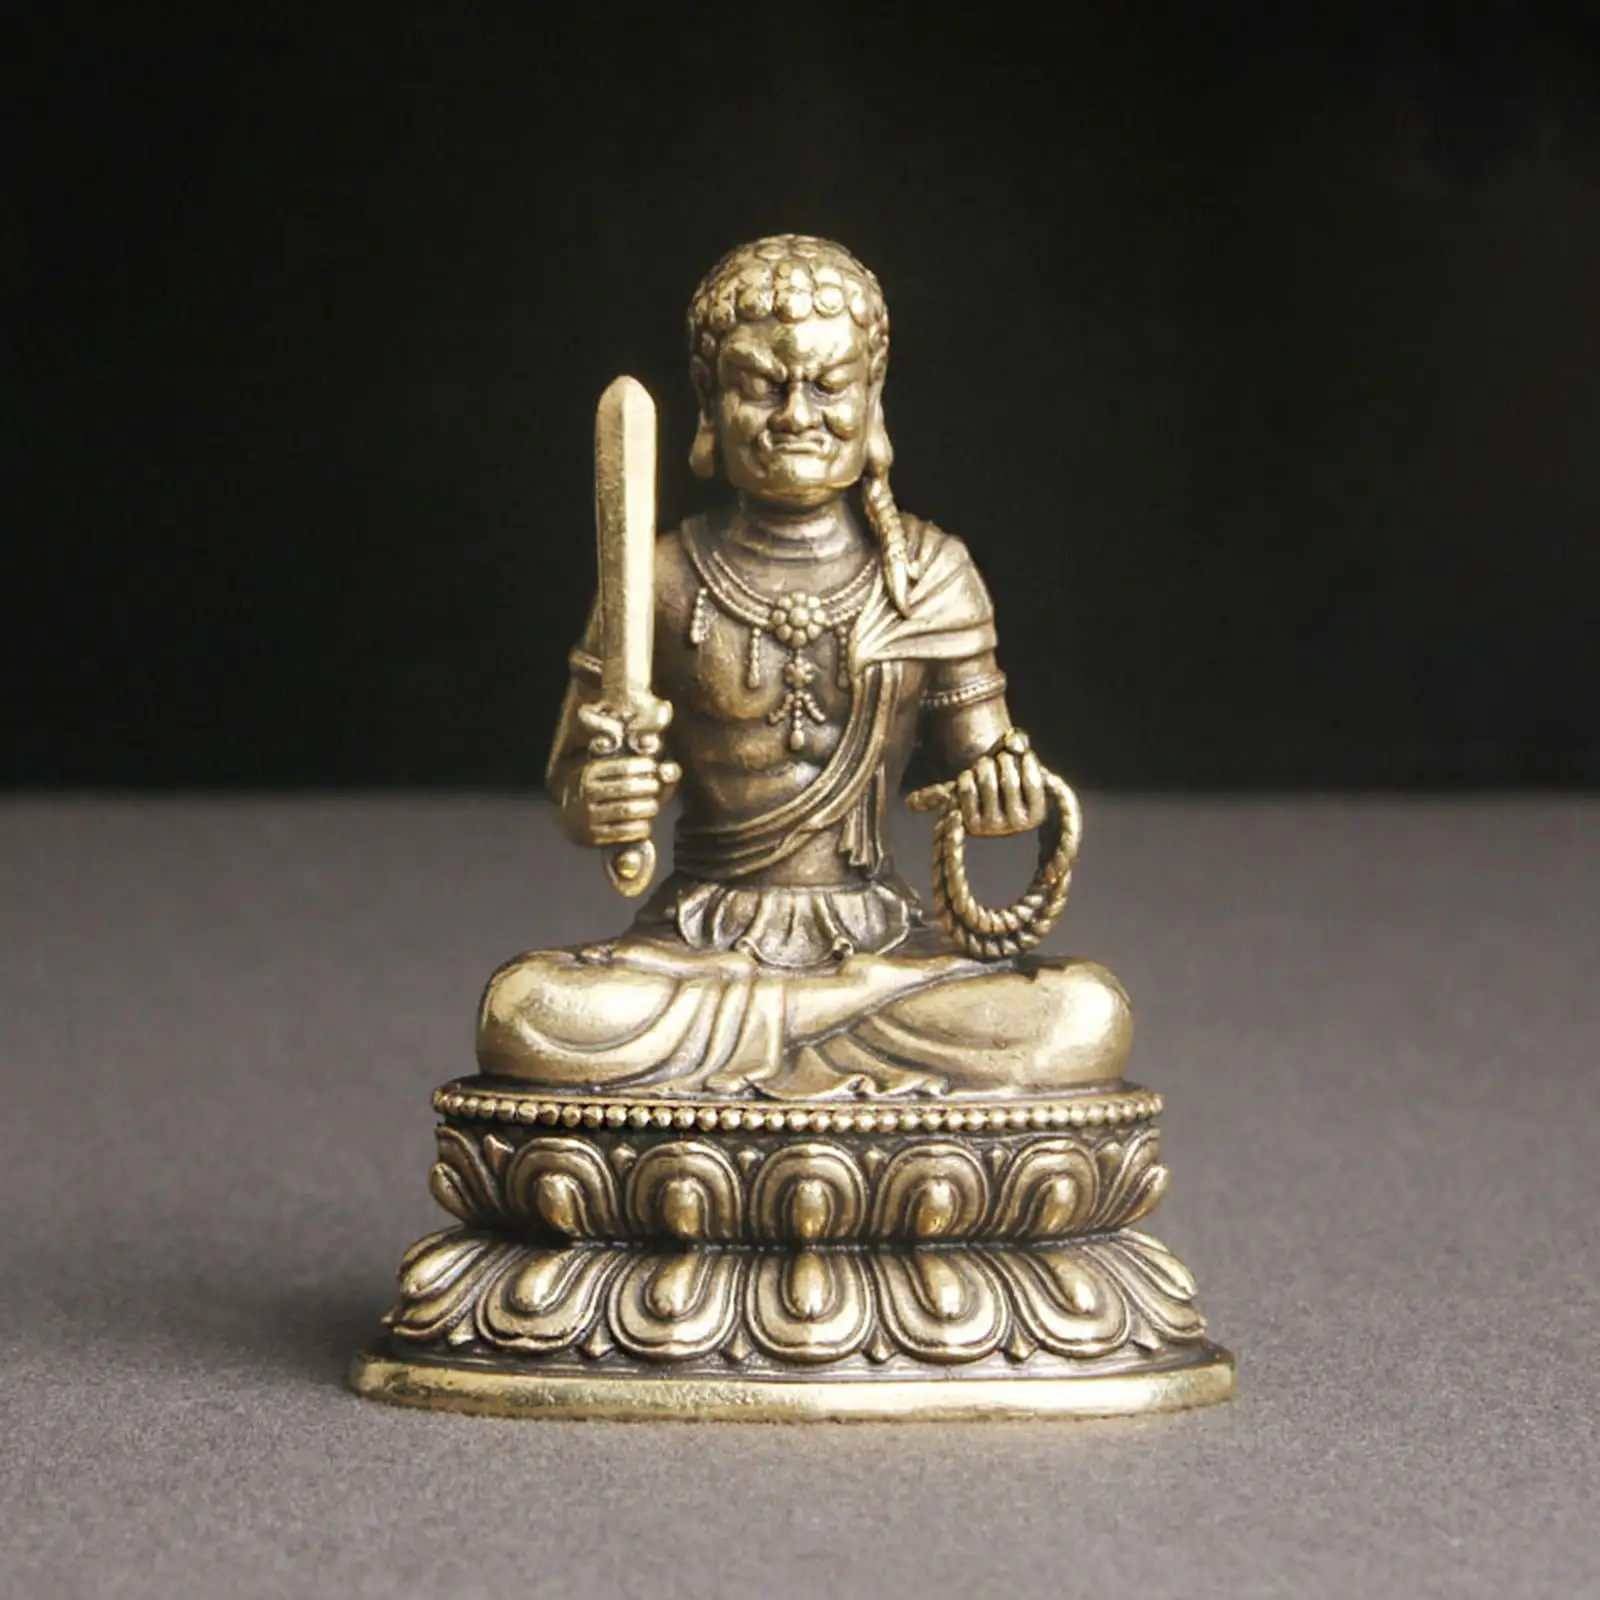 Collectible Sculpture Meditating Figurines Vintage Ornament Buddha Statue for Tabletop Collectibles Home Cabinet Accent